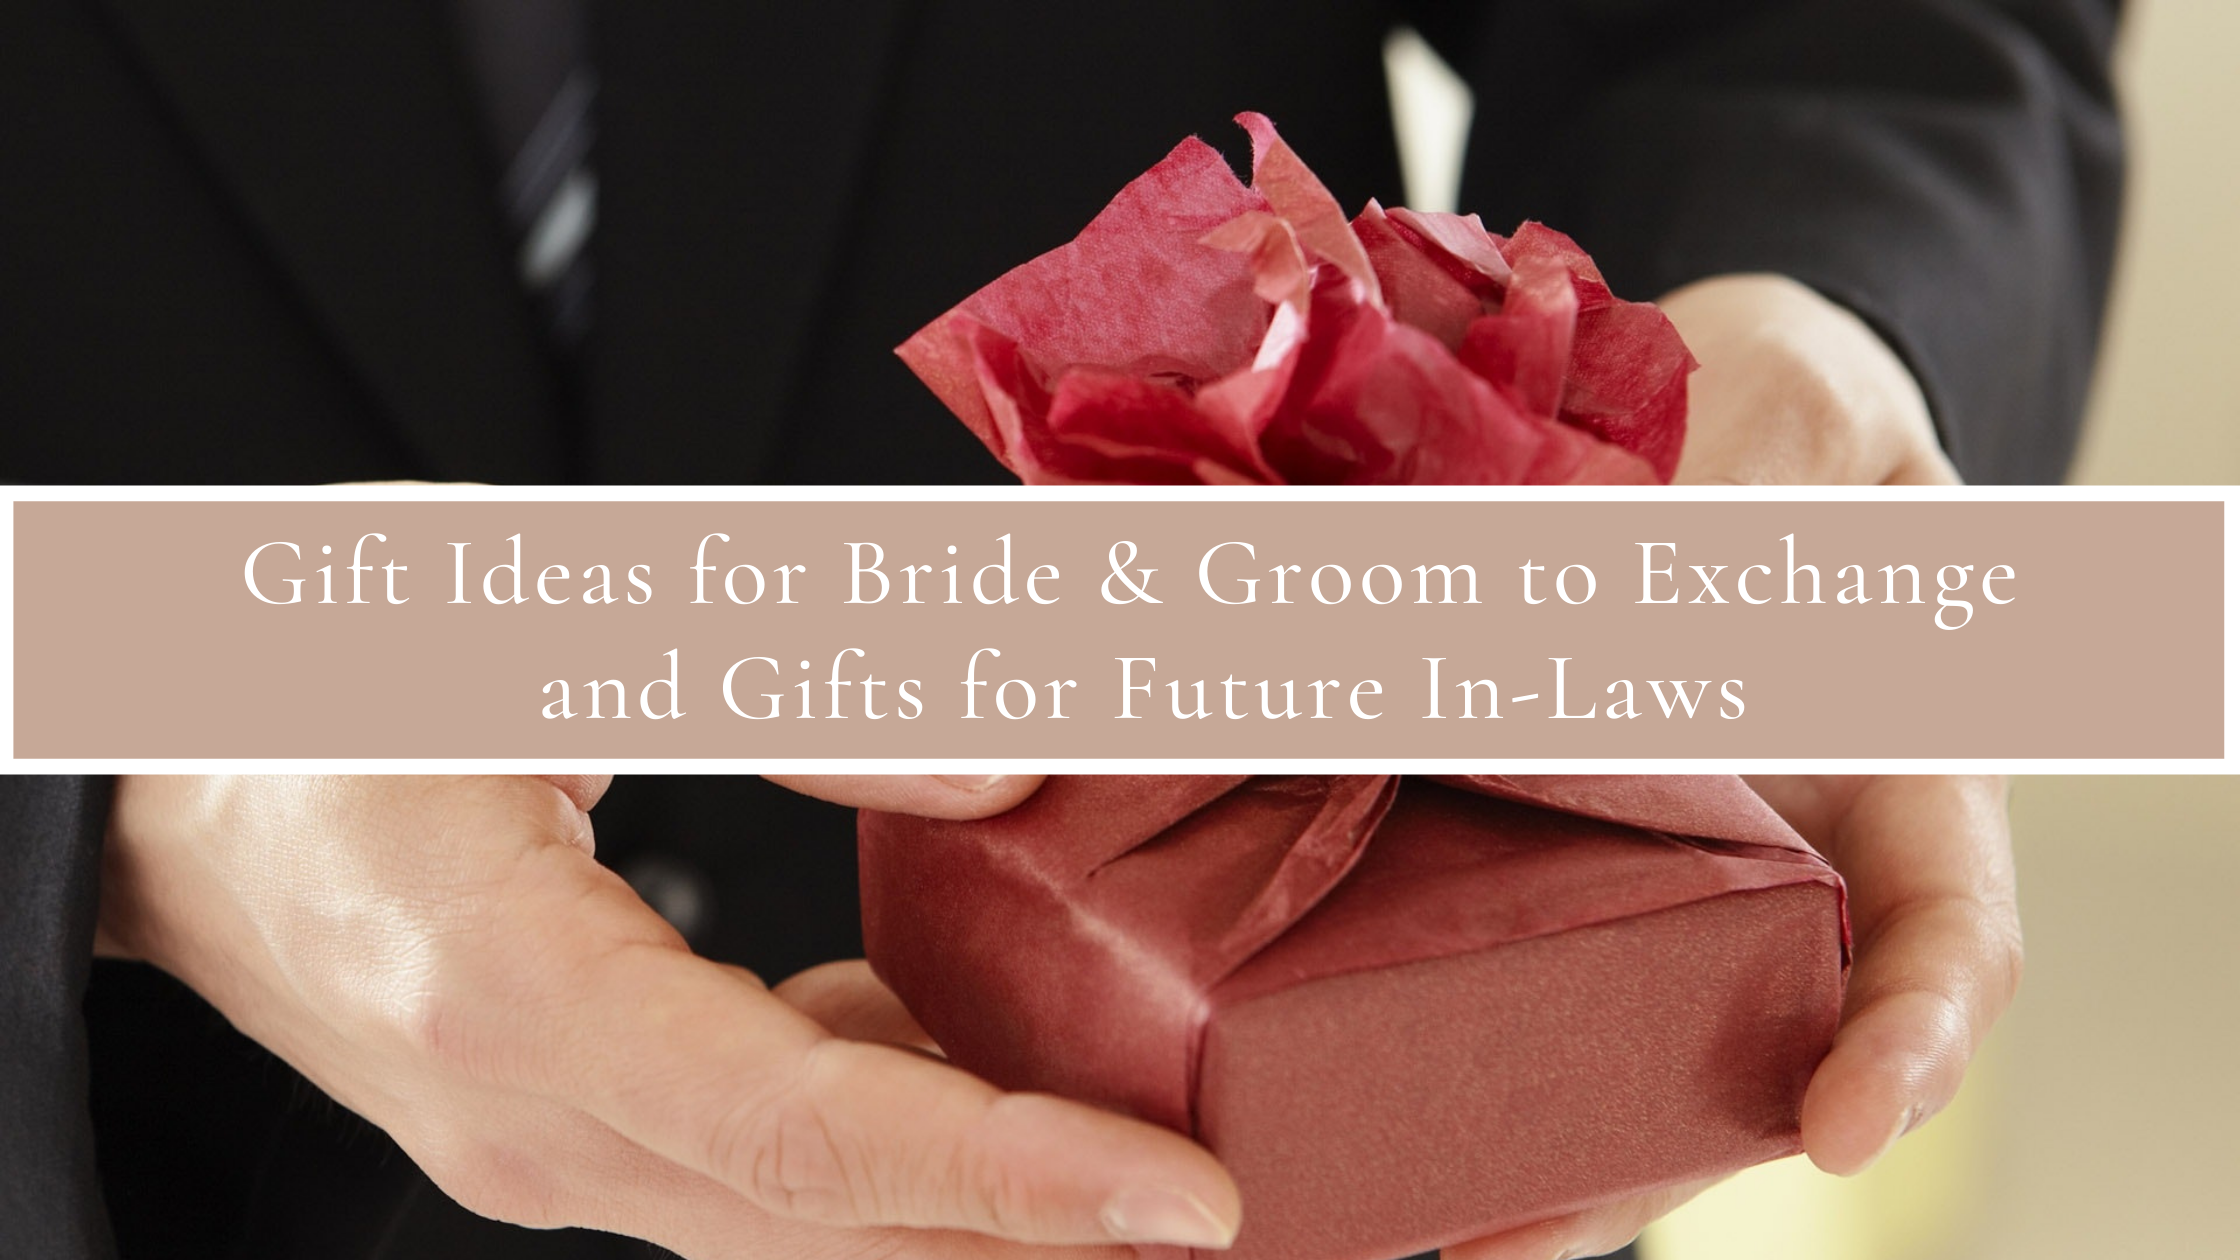 Gift Ideas for Bride & Groom to Exchange and Gifts for Future In-Laws